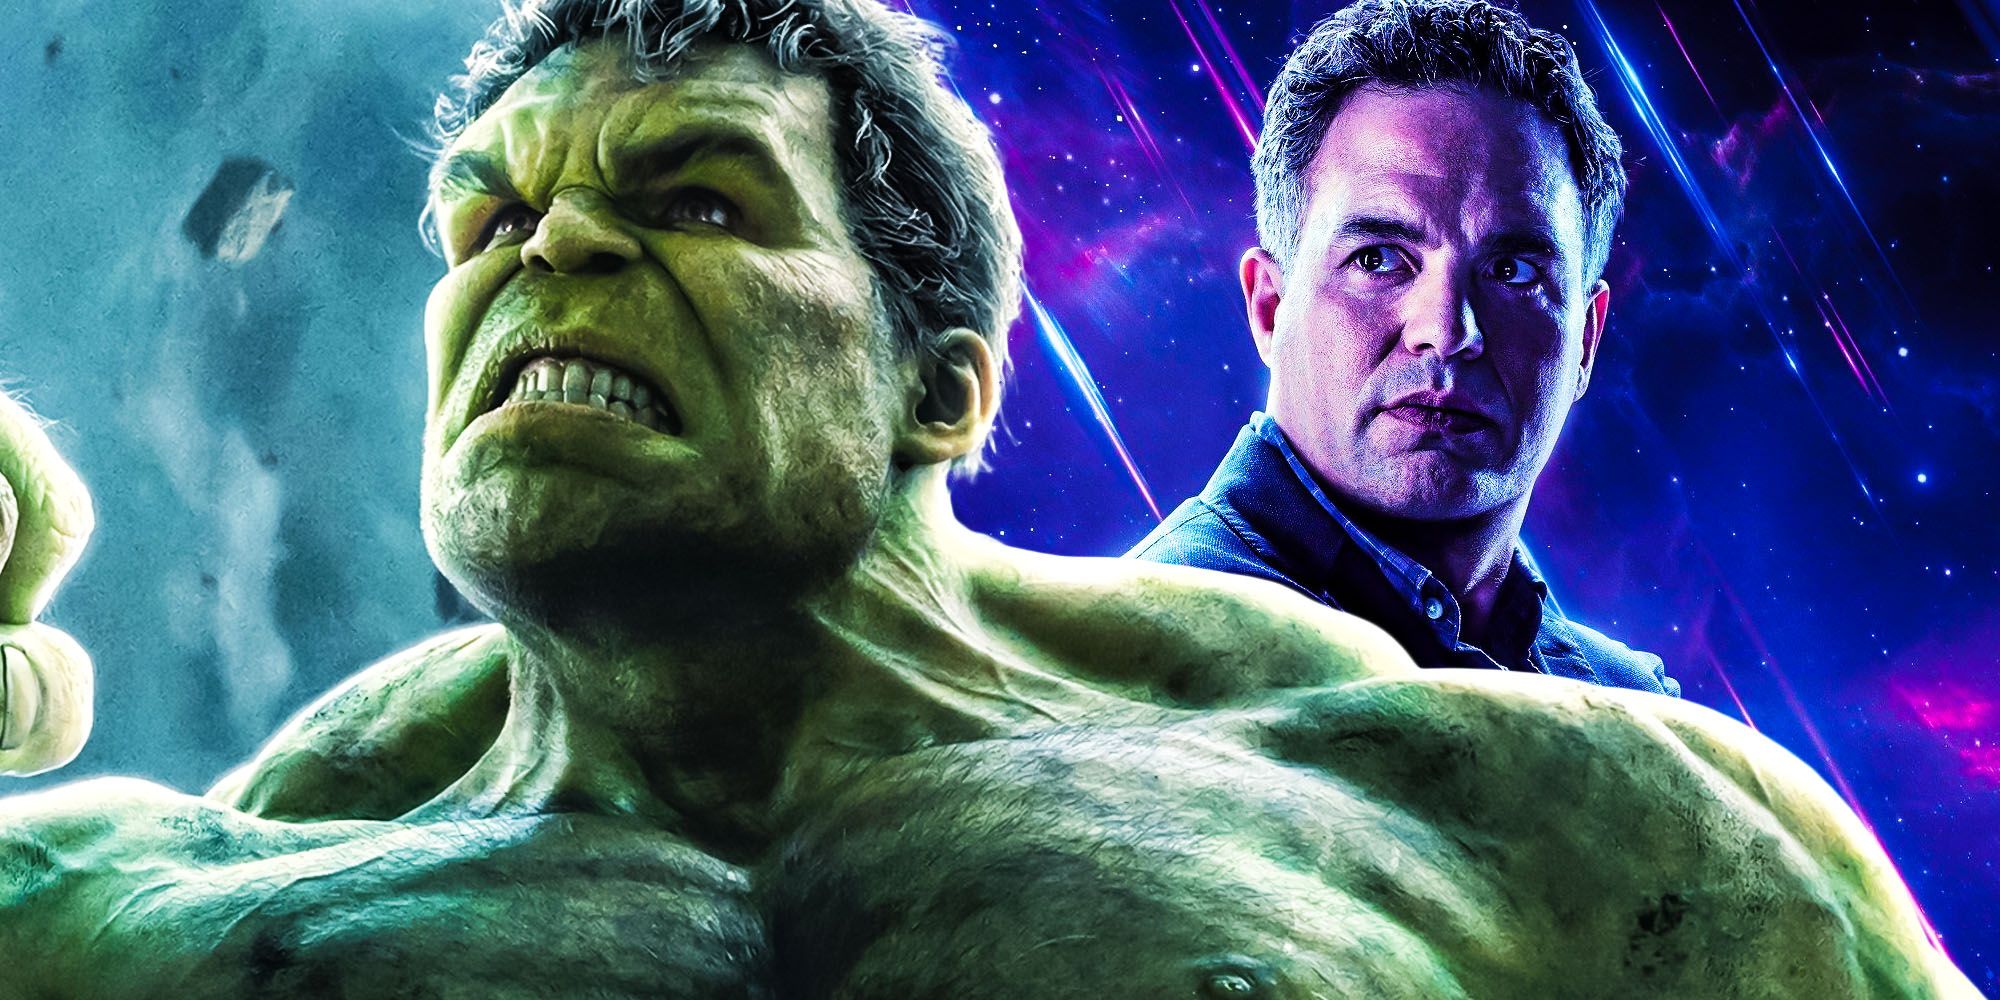 MCU Phase 5 Will See Hulk vs Bruce Banner - Marvel Theory Explained